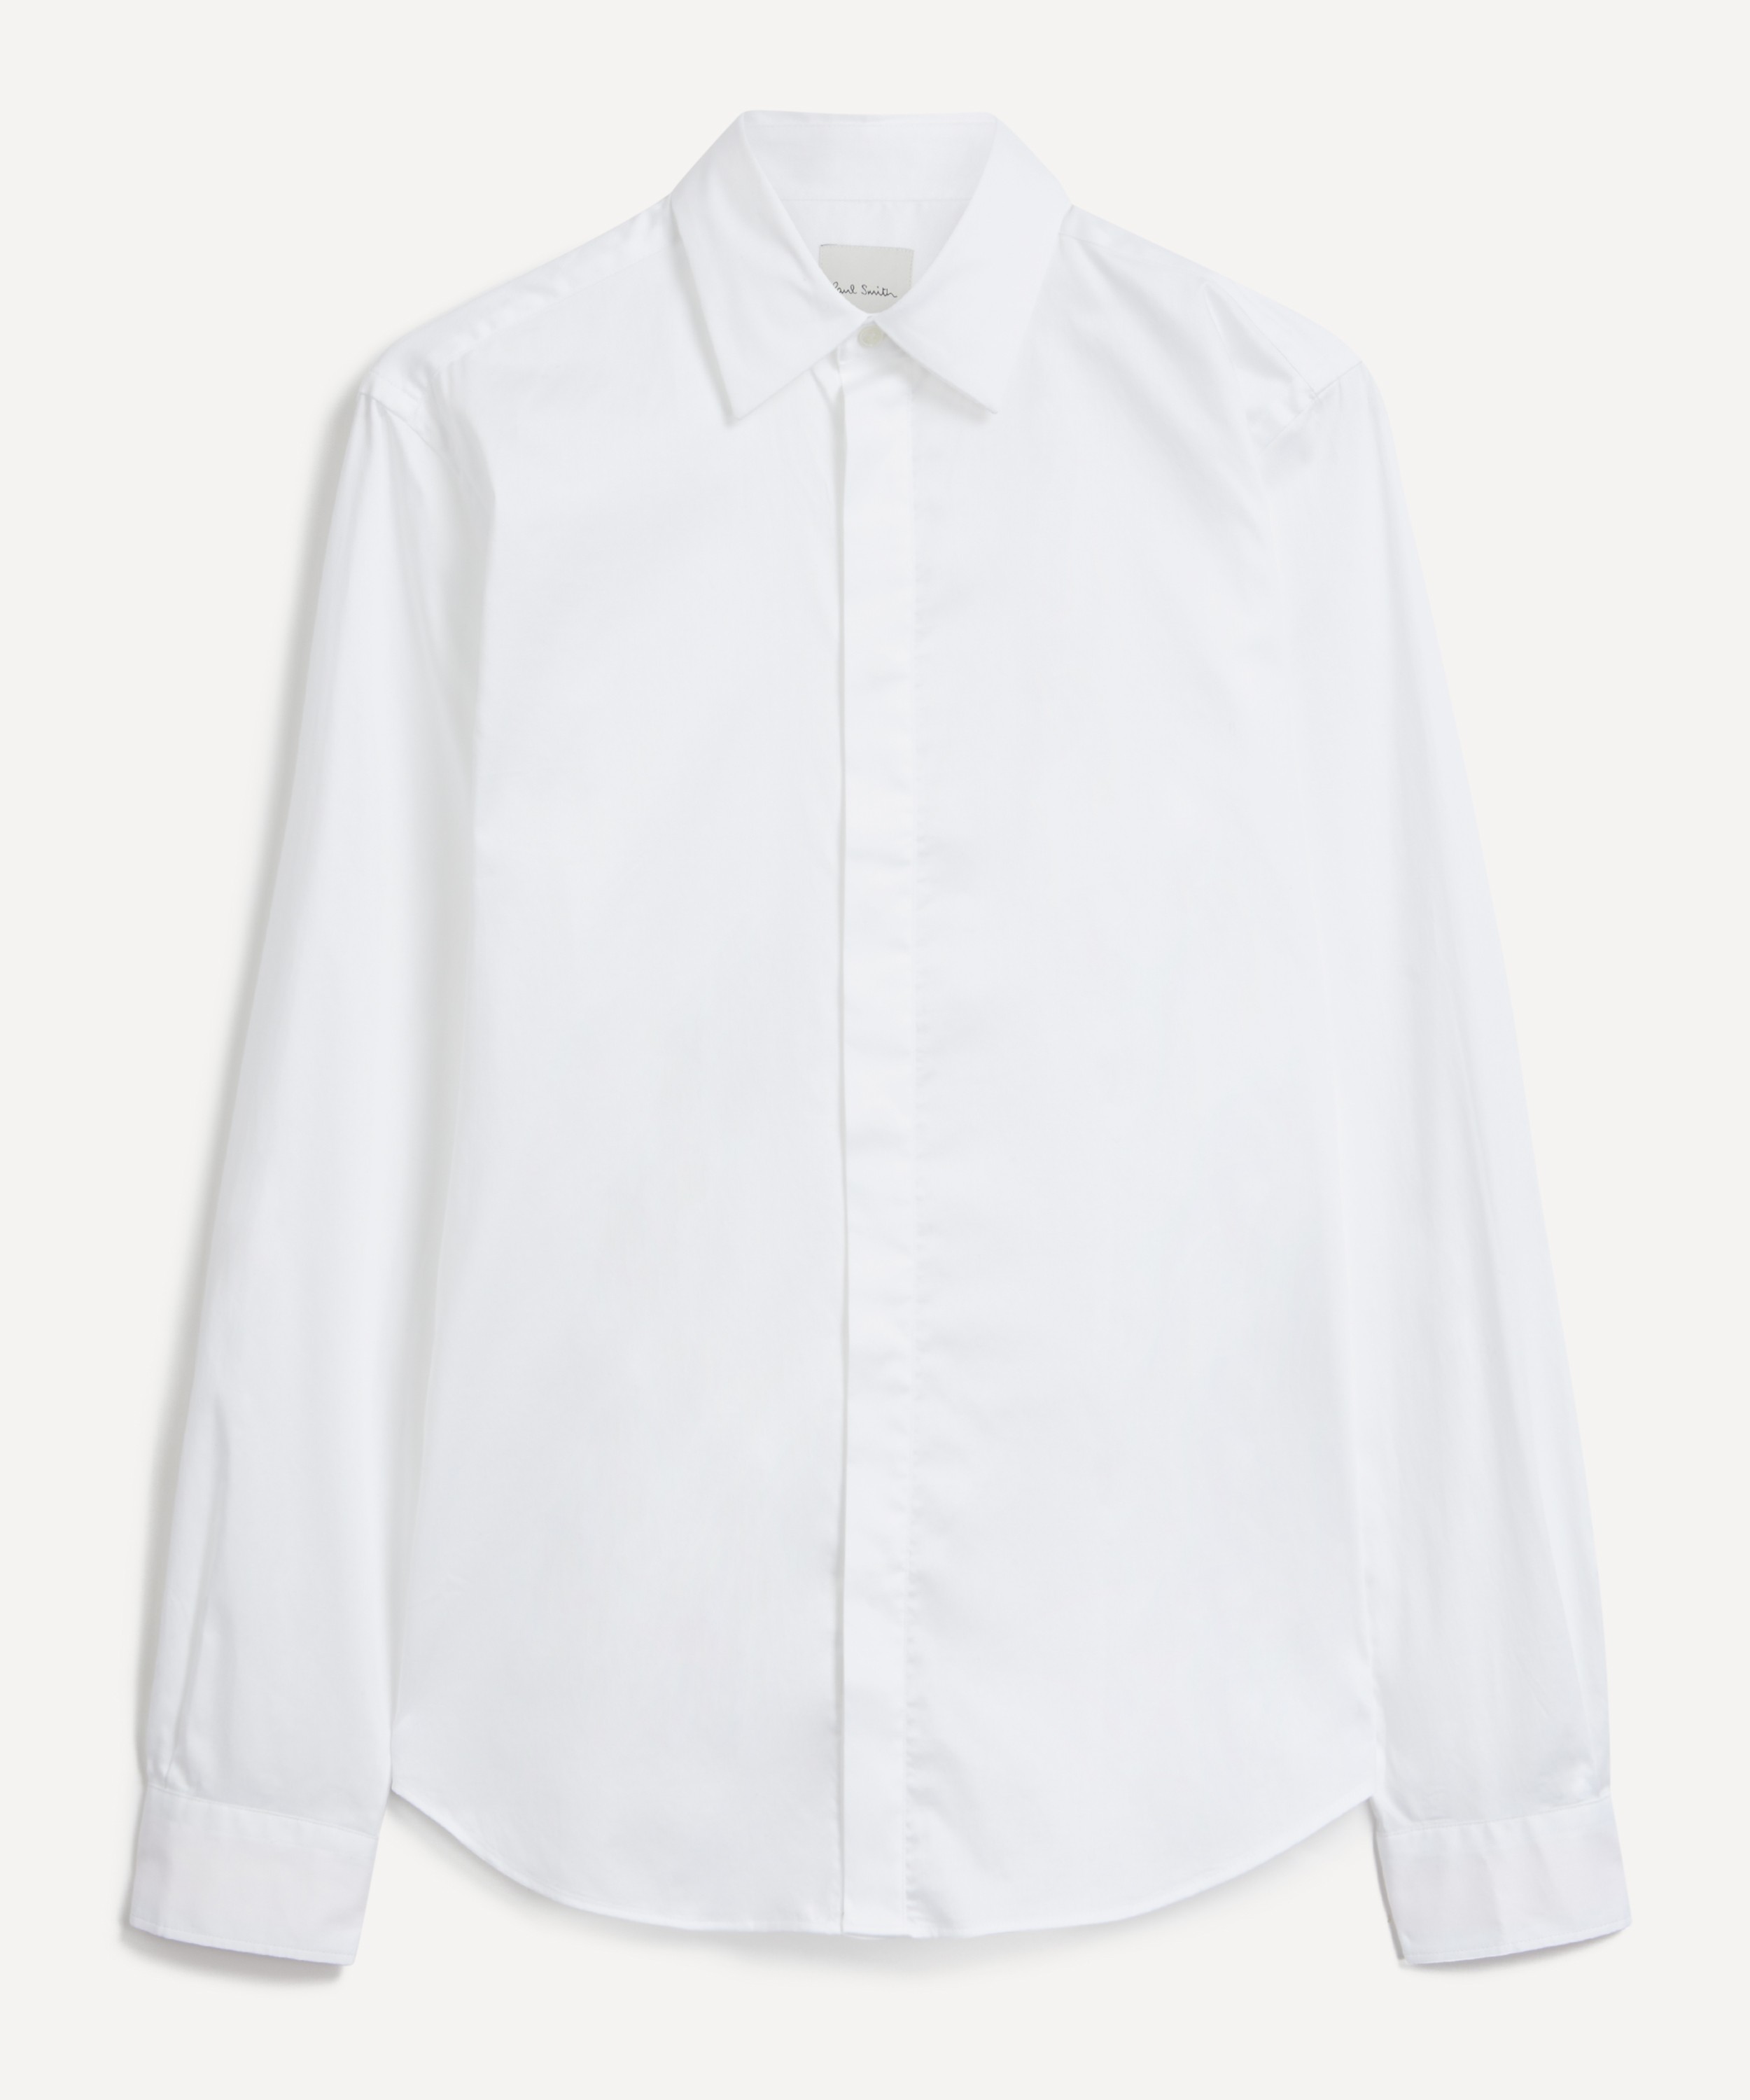 Paul Smith - Slim-Fit Twill Easy Care Shirt